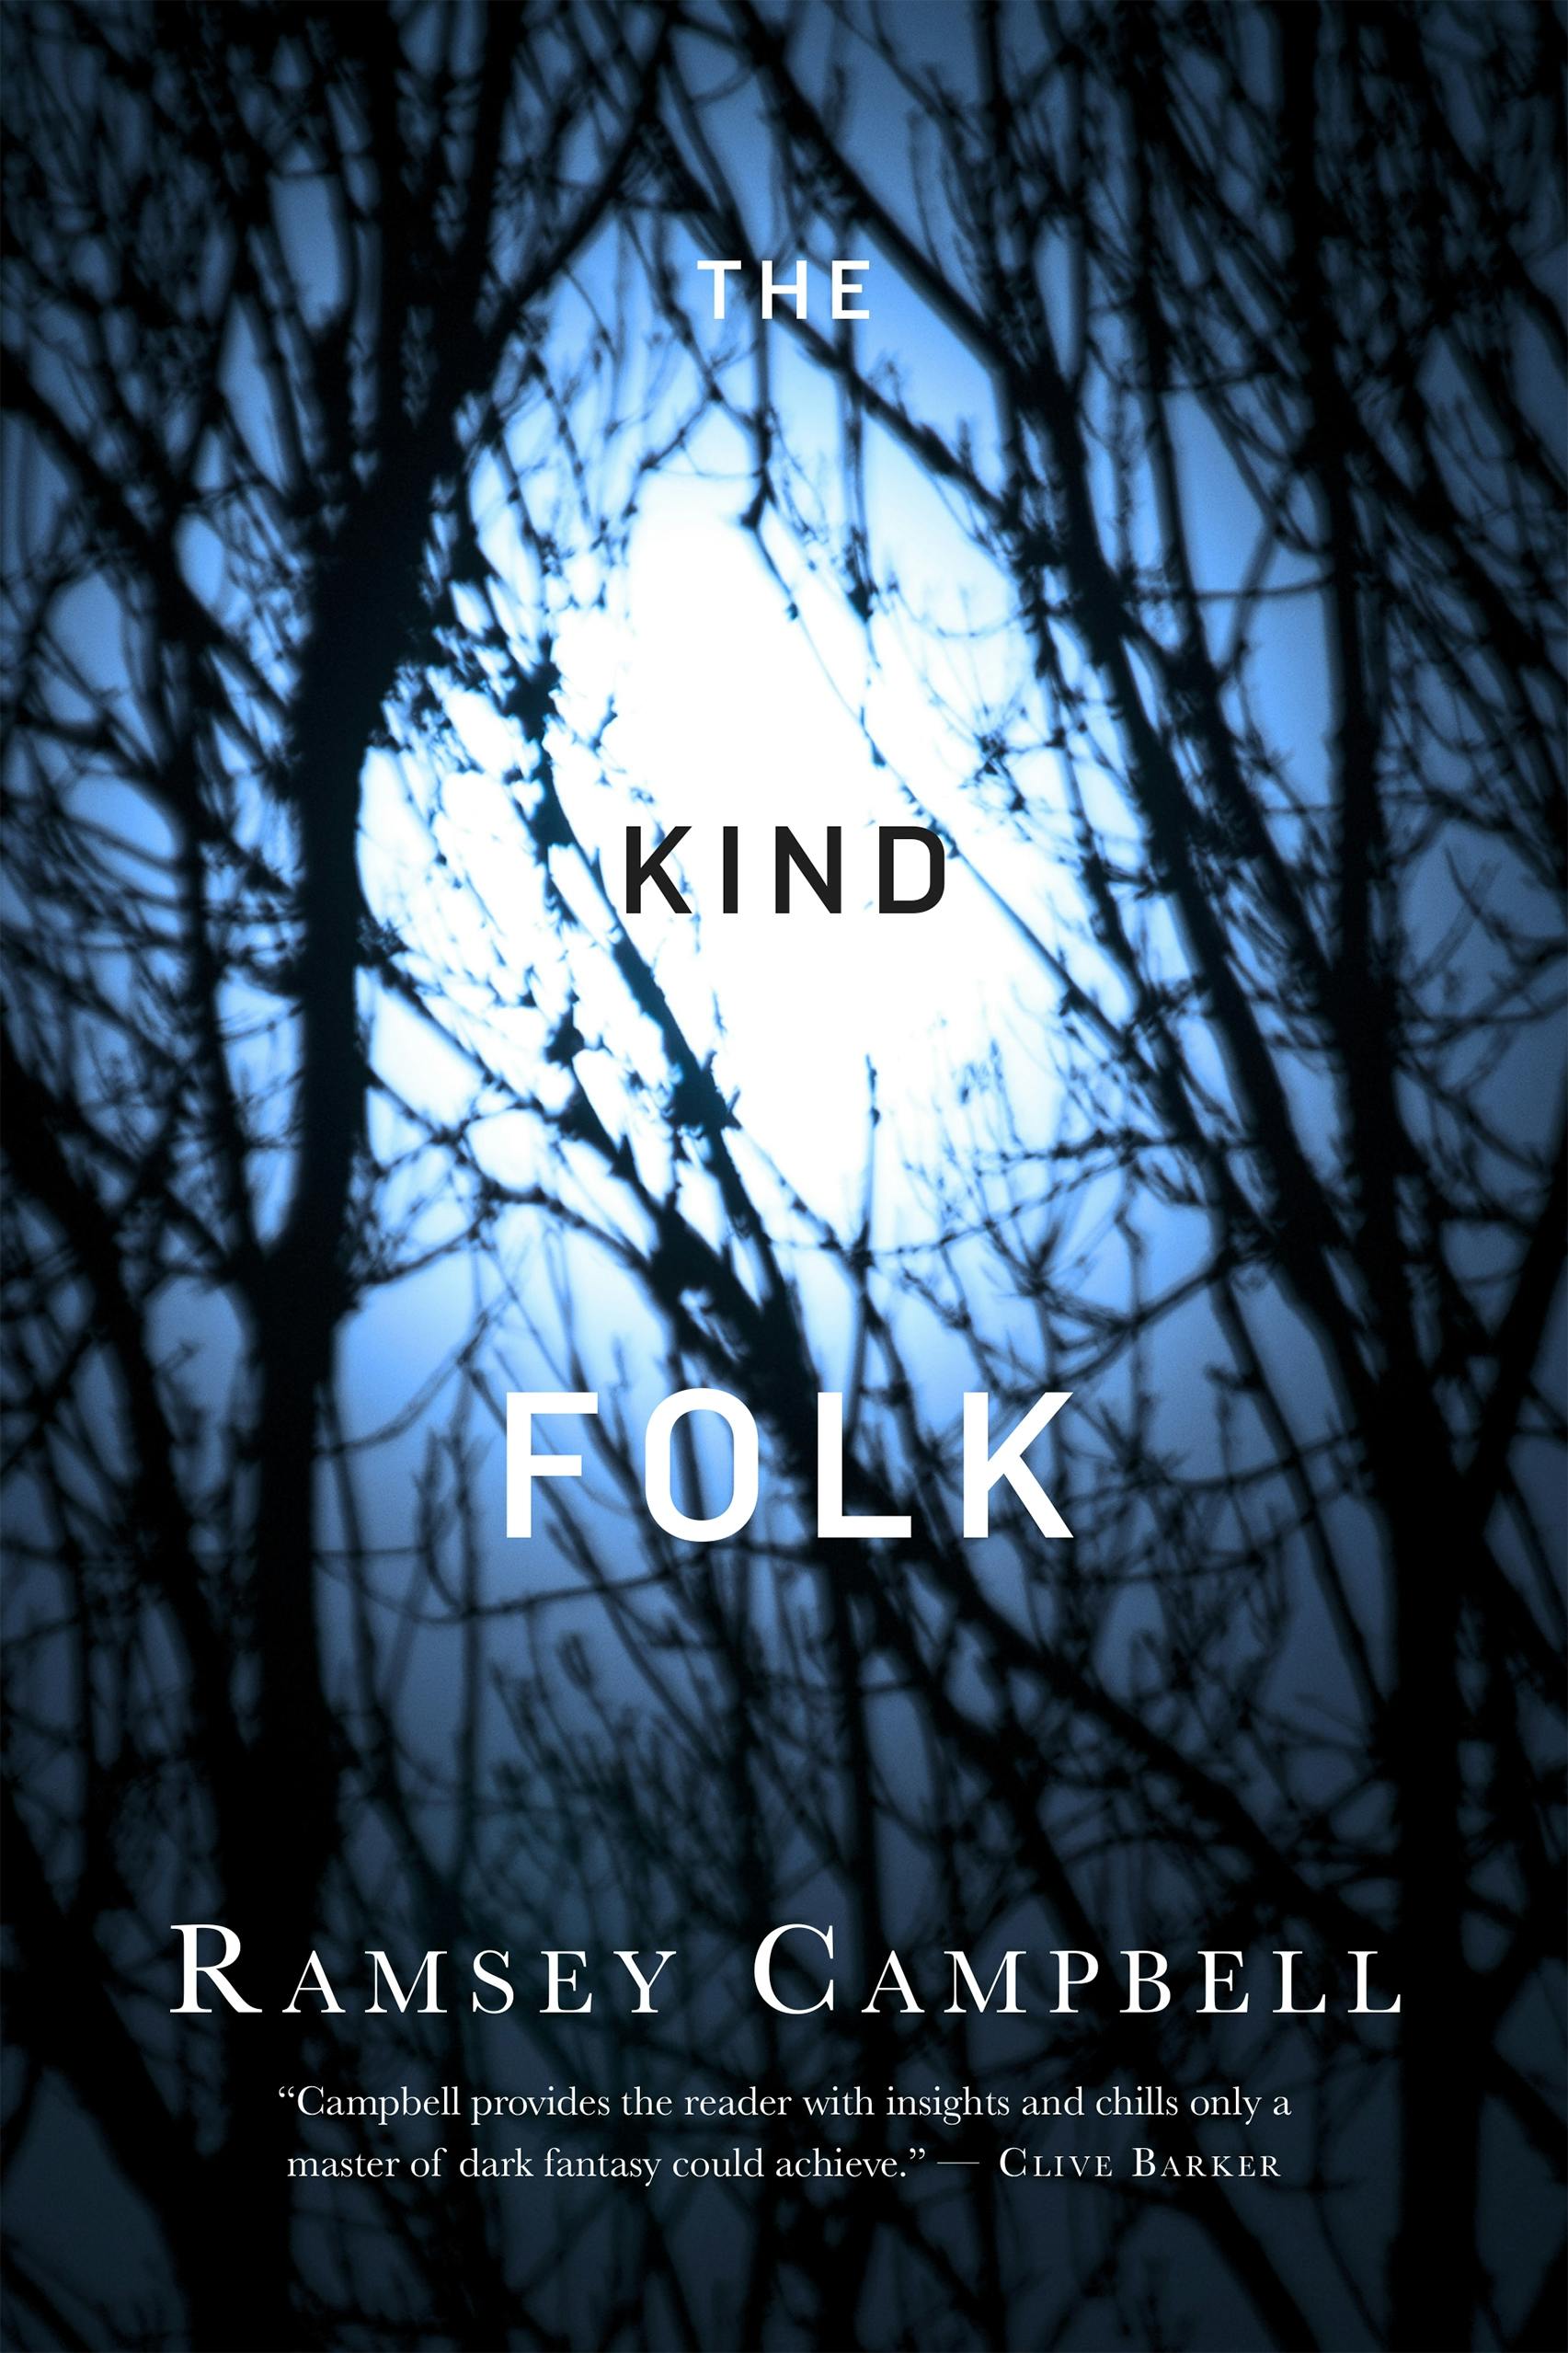 Cover for the book titled as: The Kind Folk